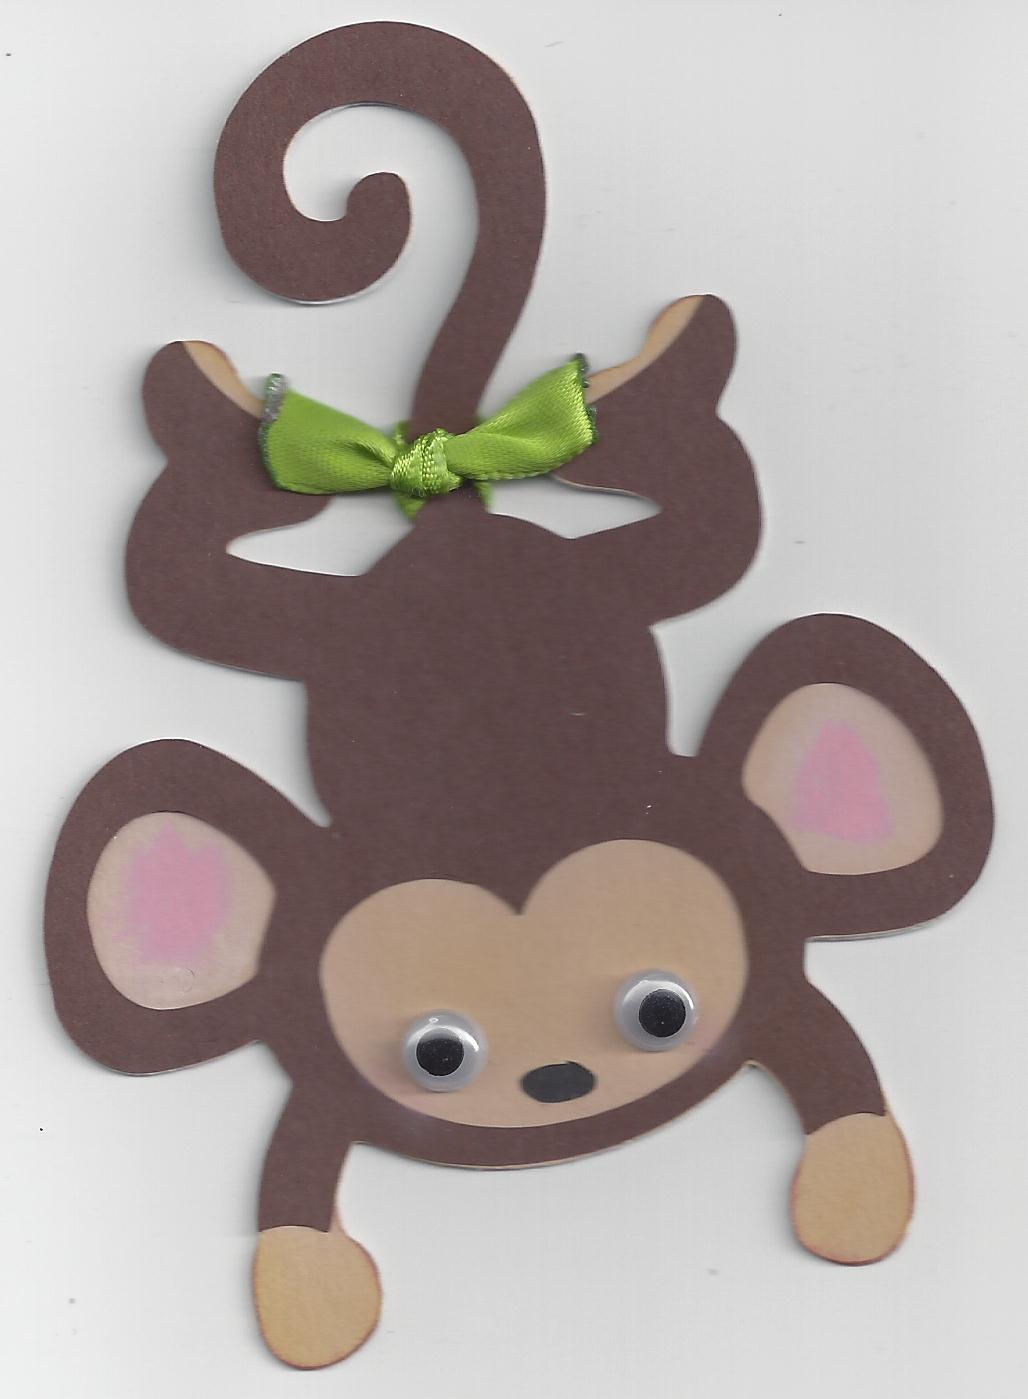 Monkey craft idea for kids | Crafts and Worksheets for ...